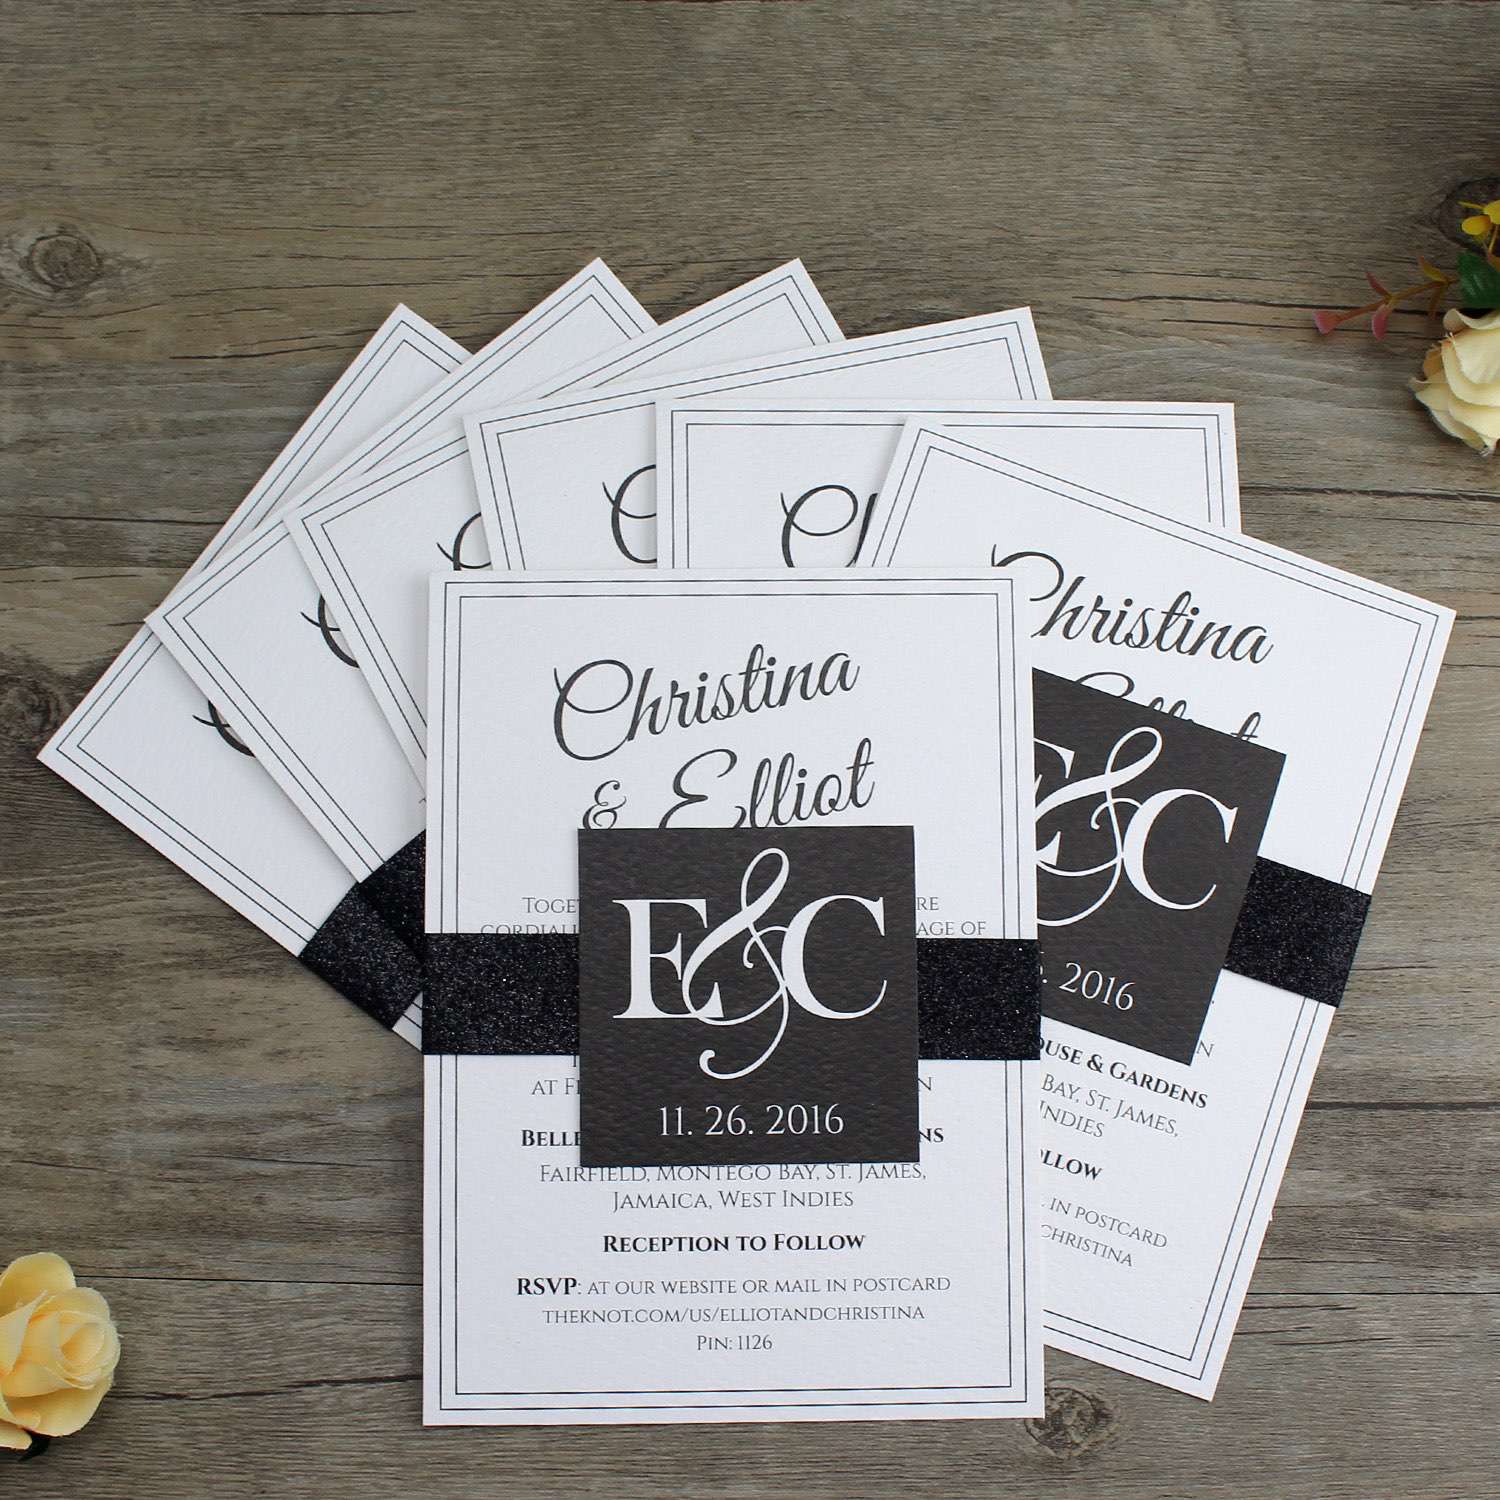 Black and White Invitation Card Simple Style Business Card Wedding Invitation with Envelope